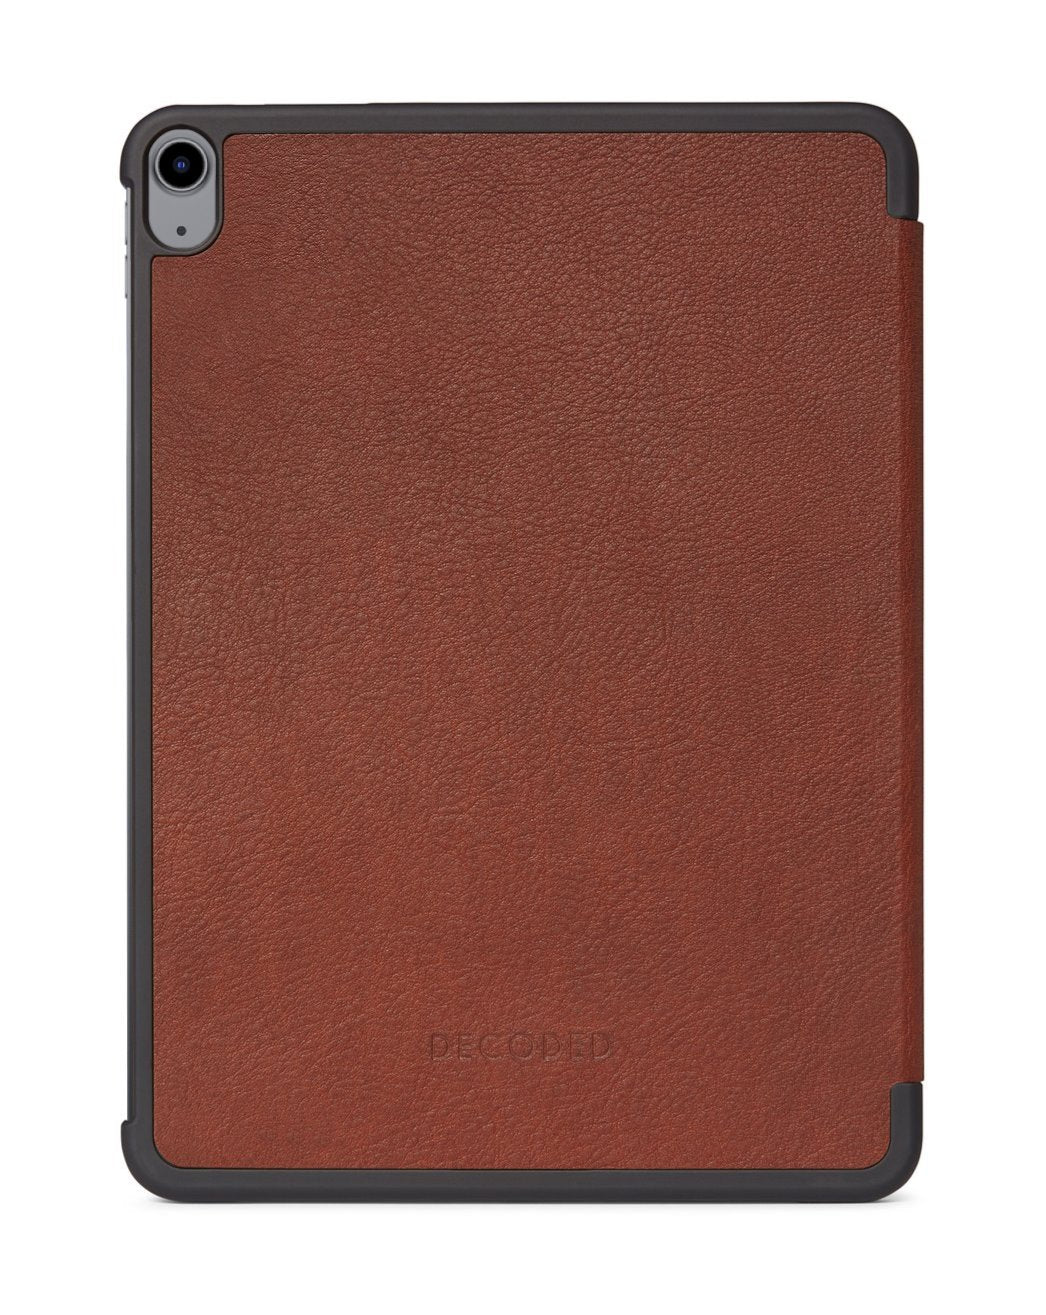 iPad Air 10.9 4th Gen (2020) Leather Case Slim Cover Brown